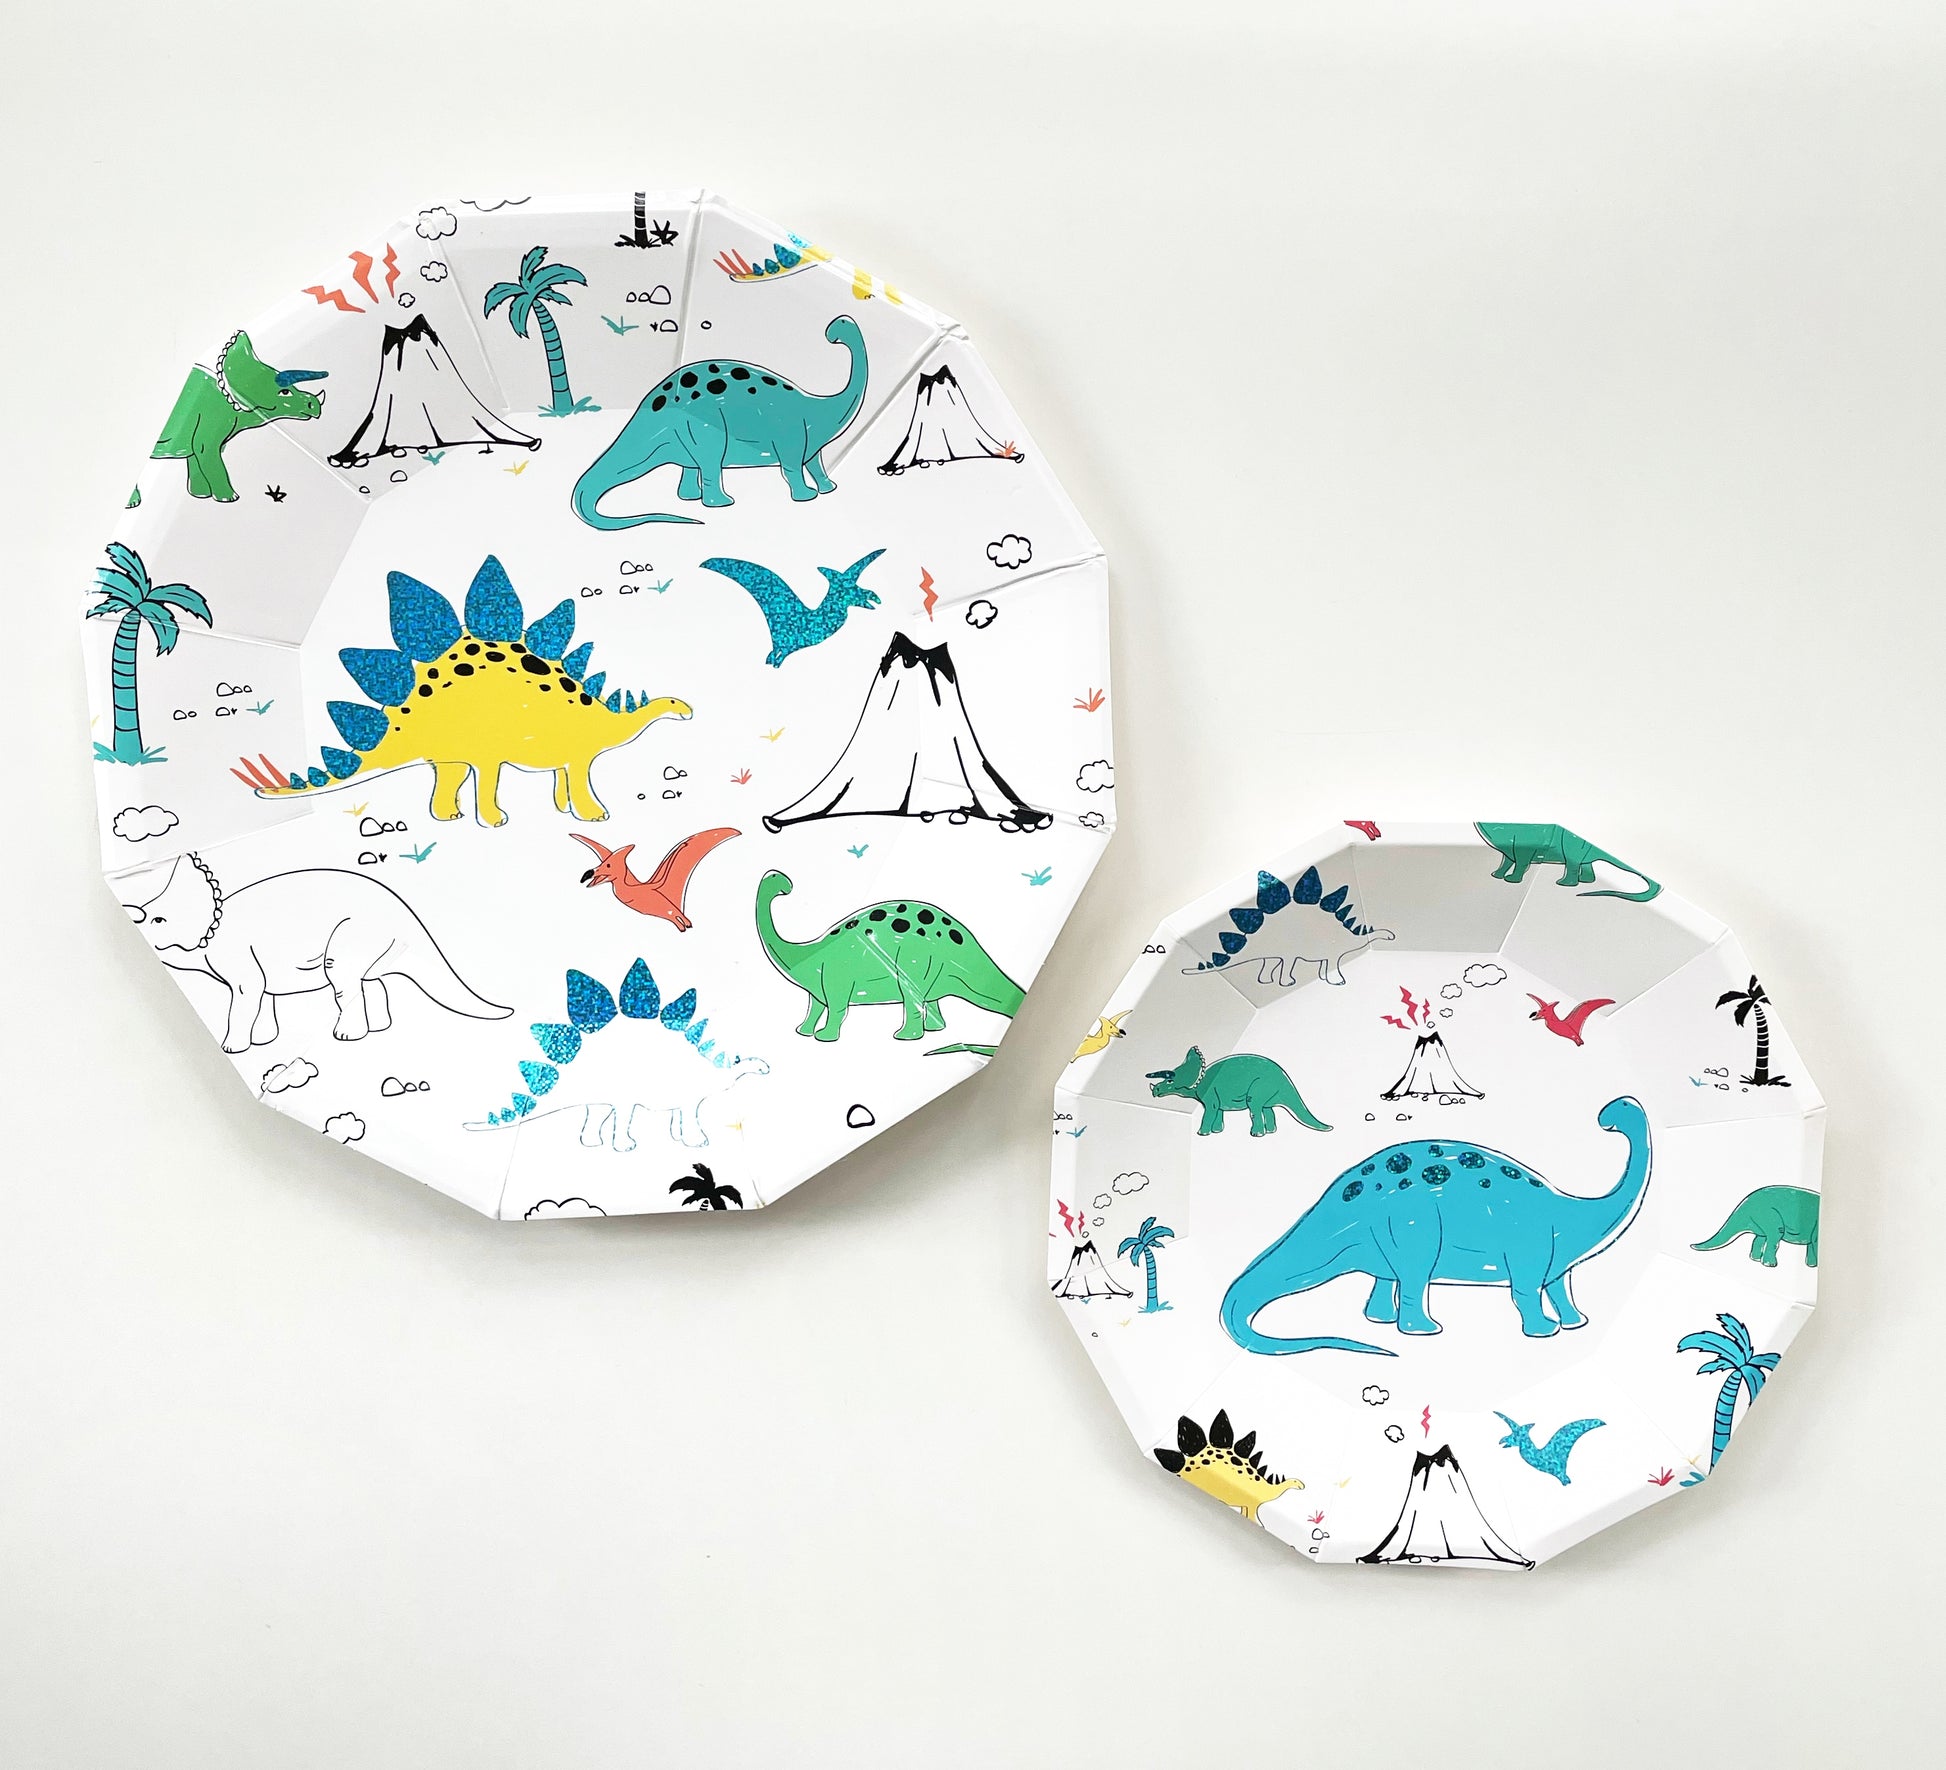 The large and small paper party plate dinosaur pattern features green, blue, yellow and red dinosaurs, volcanoes and palm trees. The party plates feature blue metallic elements, and are in the shape of a dodecagon.